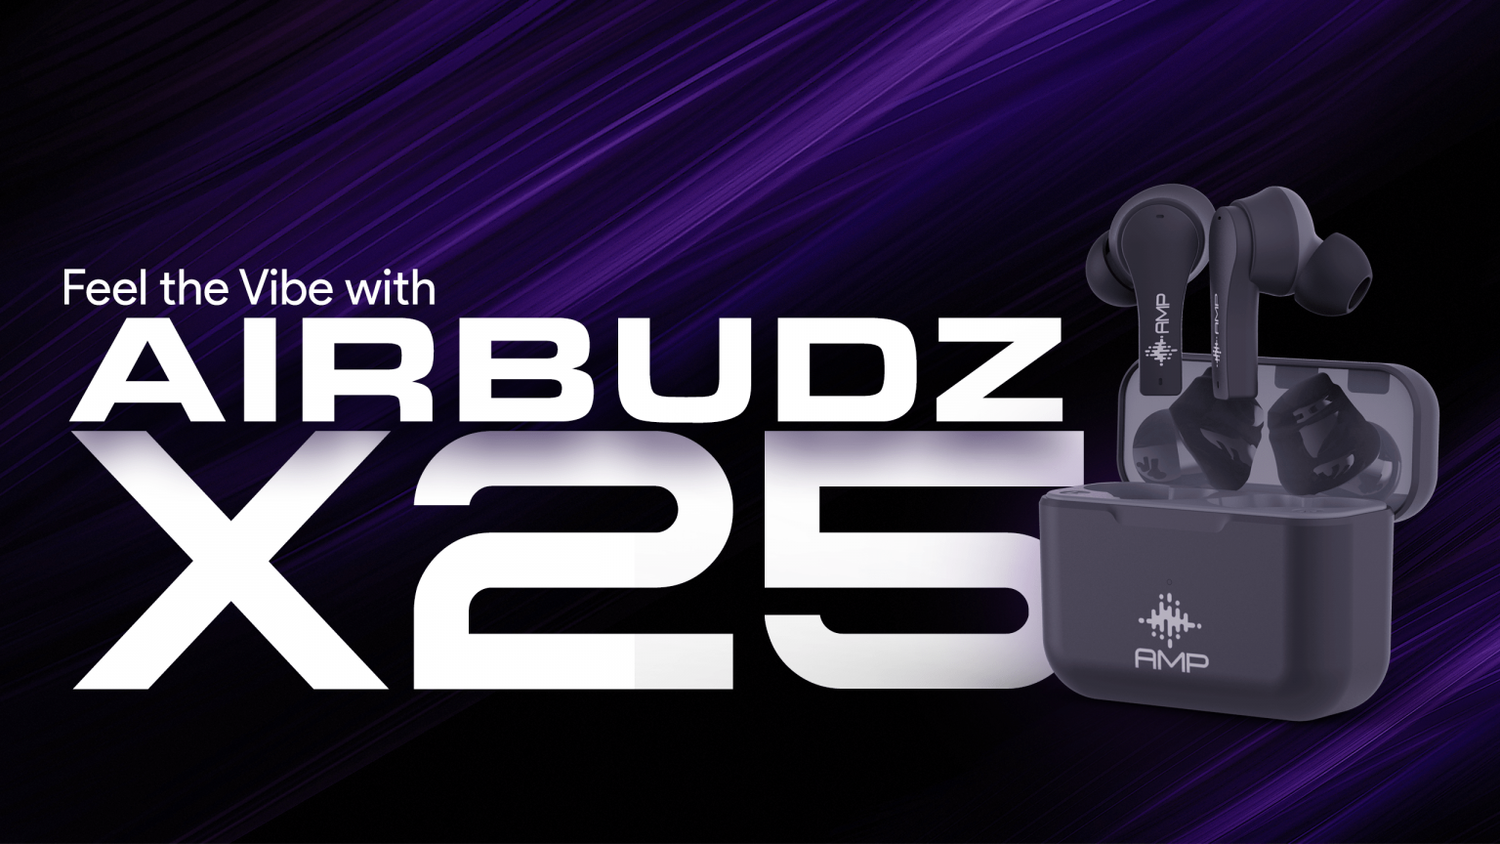 Discover a new vibe with AMP Air Budz X25 True wireless earphones